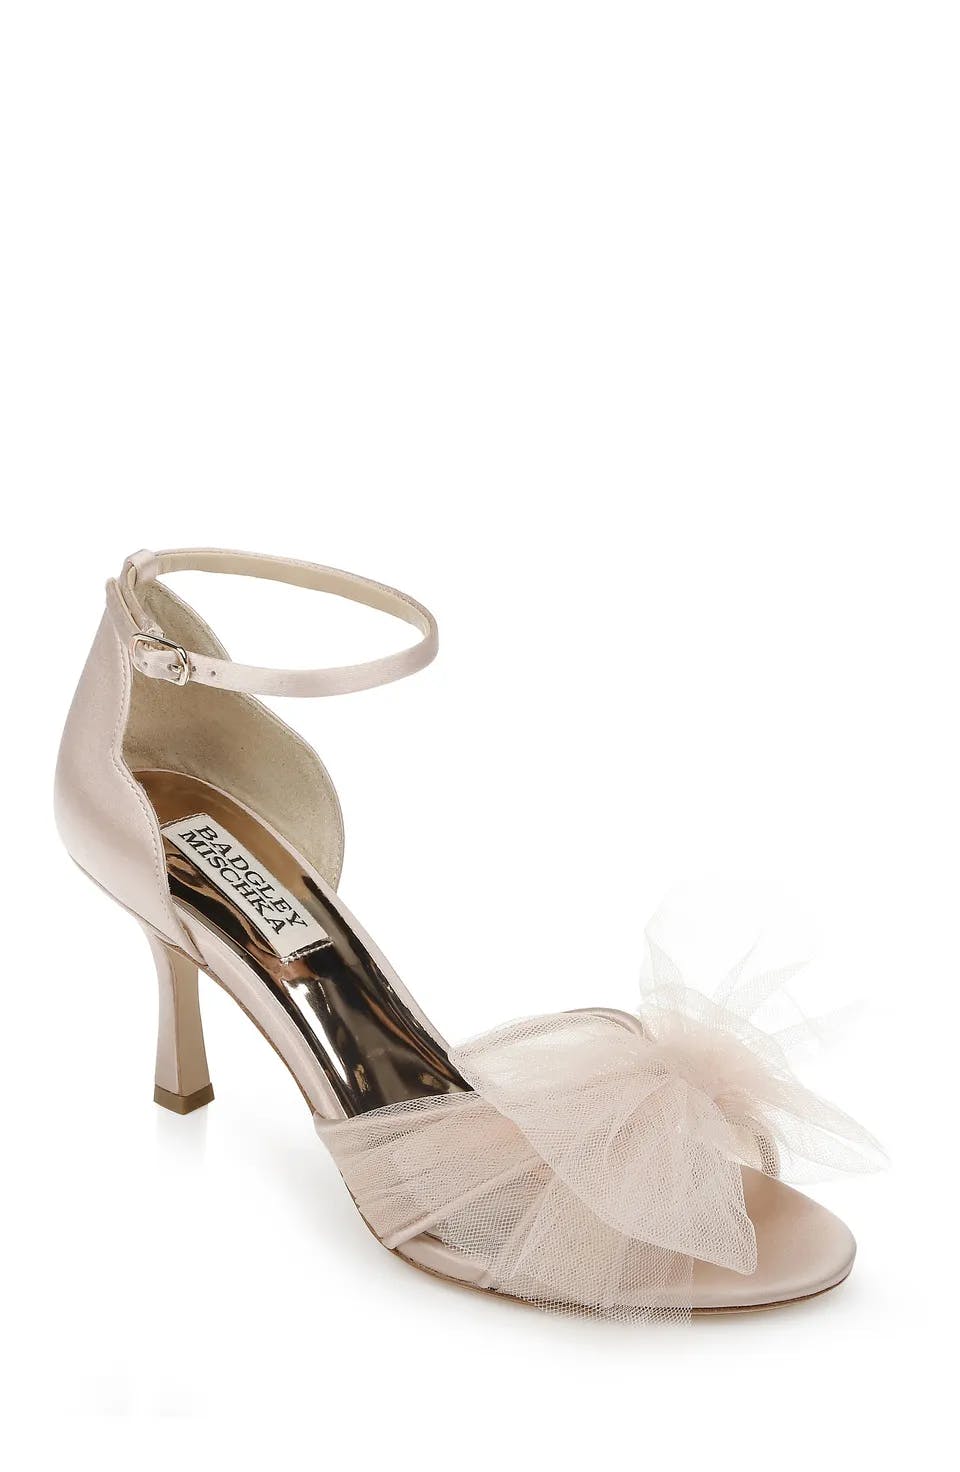 A single light pink high heel sandal with an ankle strap and a textured bow embellishment on the front. The interior sole has branding text. The heel is thin and mid-height. The design is elegant and feminine.